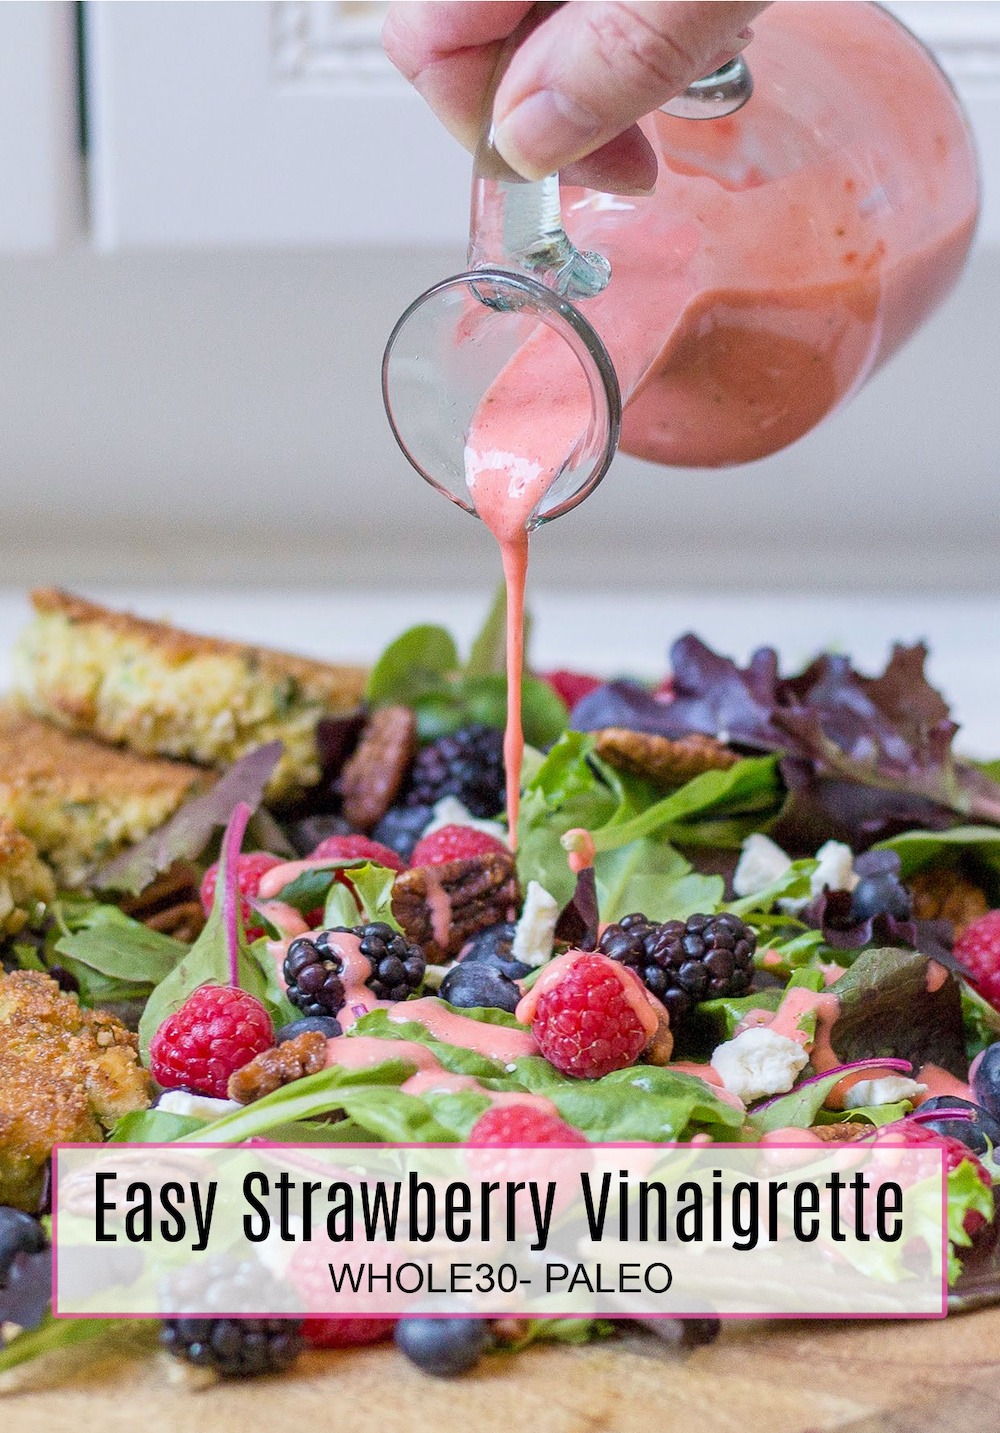 Creamy Strawberry Vinaigrette - Whole30/Paleo being poured onto a green salad on wood serving board